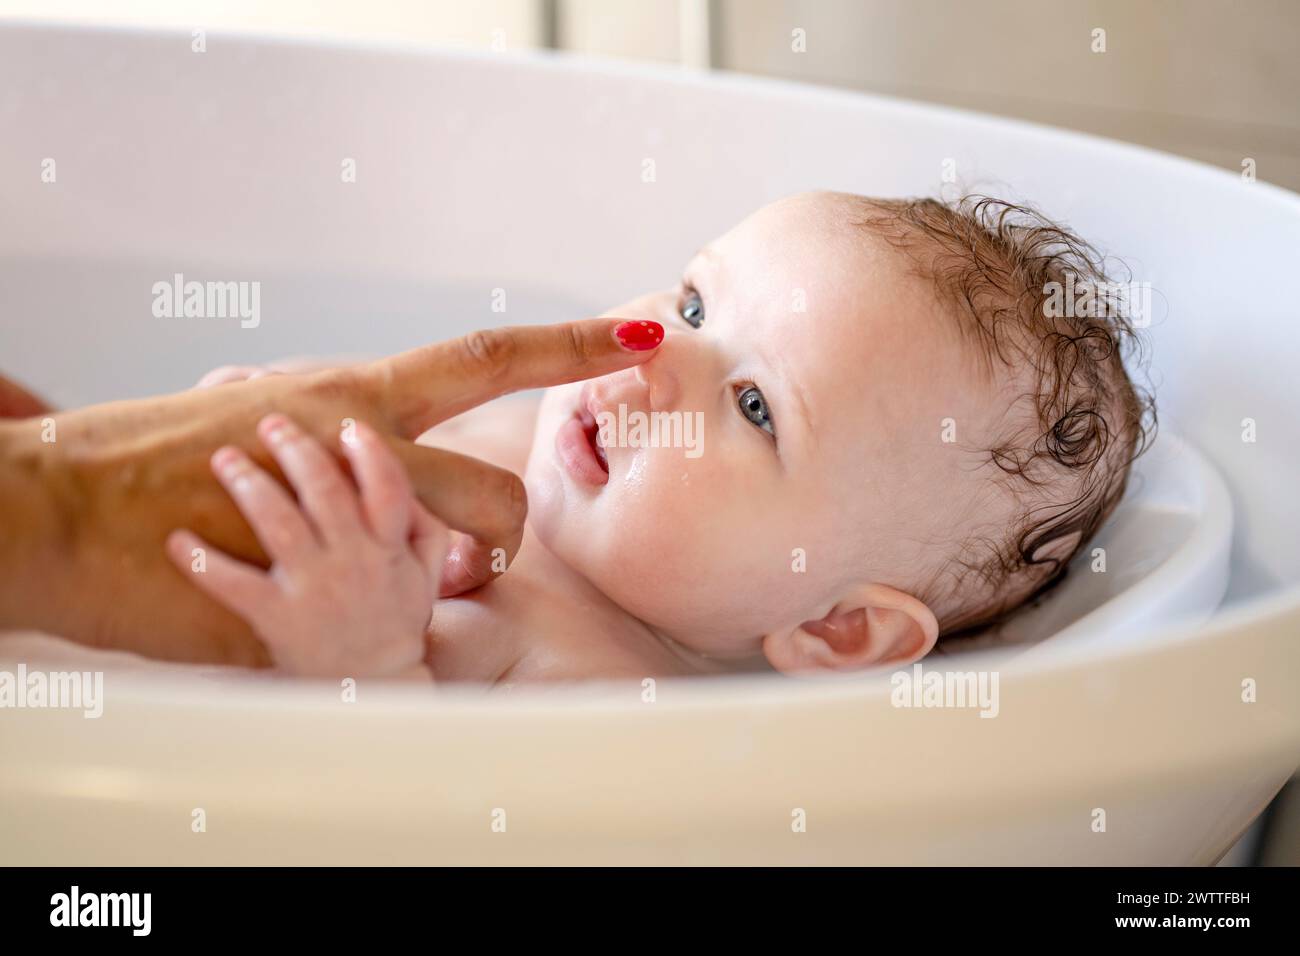 Baby's bathtime bonding moment with a playful touch on the nose Stock Photo